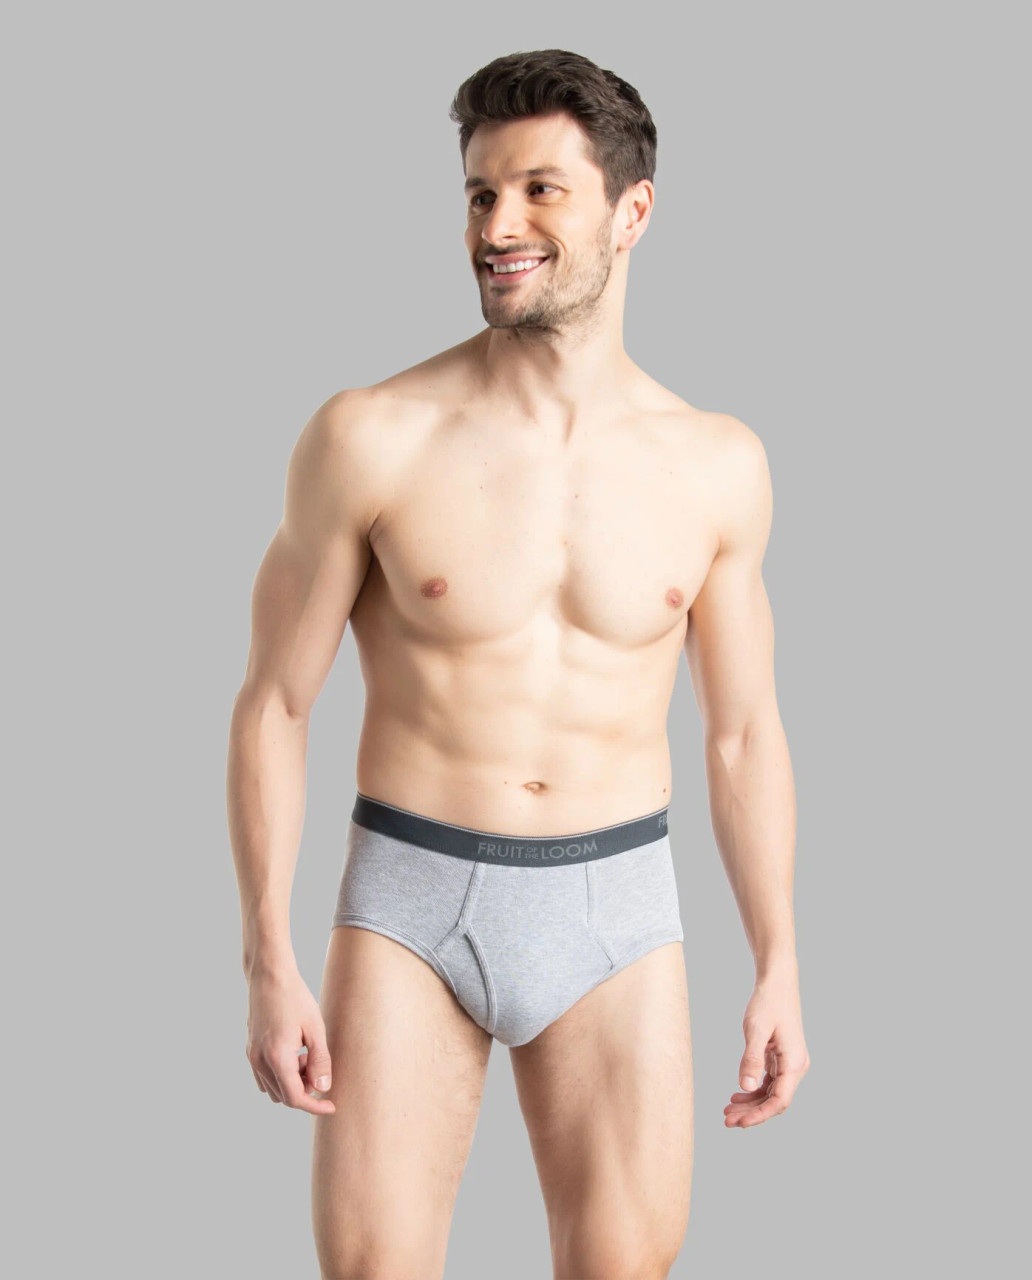 Fruit of the Loom Men's Fashion Briefs